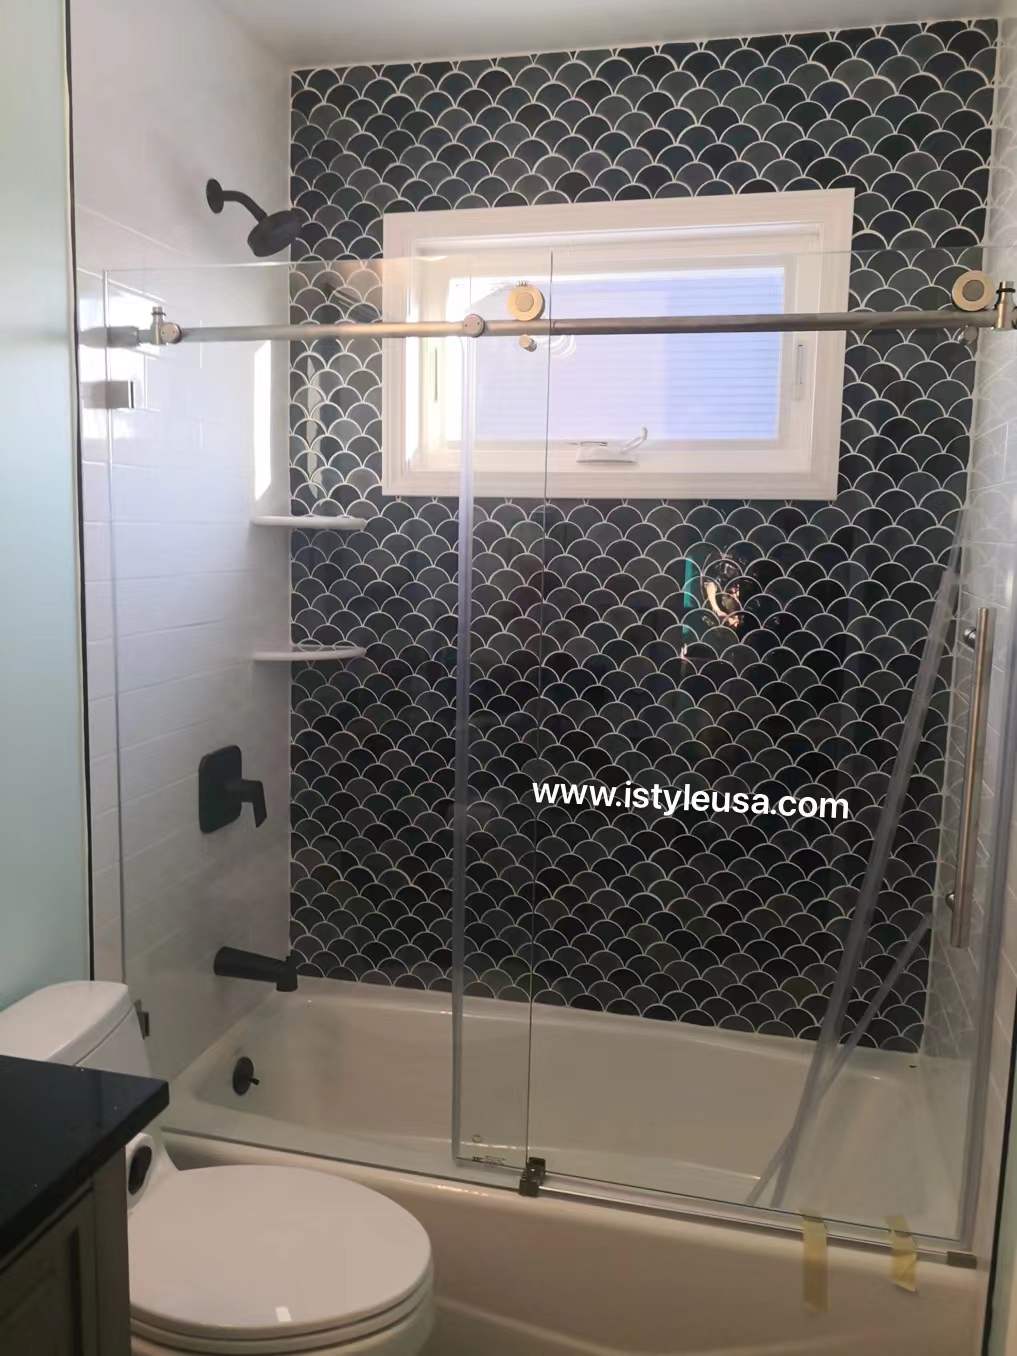 BR01 Joseph Frameless Single Sliding Shower Door with Klearteck Treatment (3/8" Thickness) (Chrome) - iStyle Bath